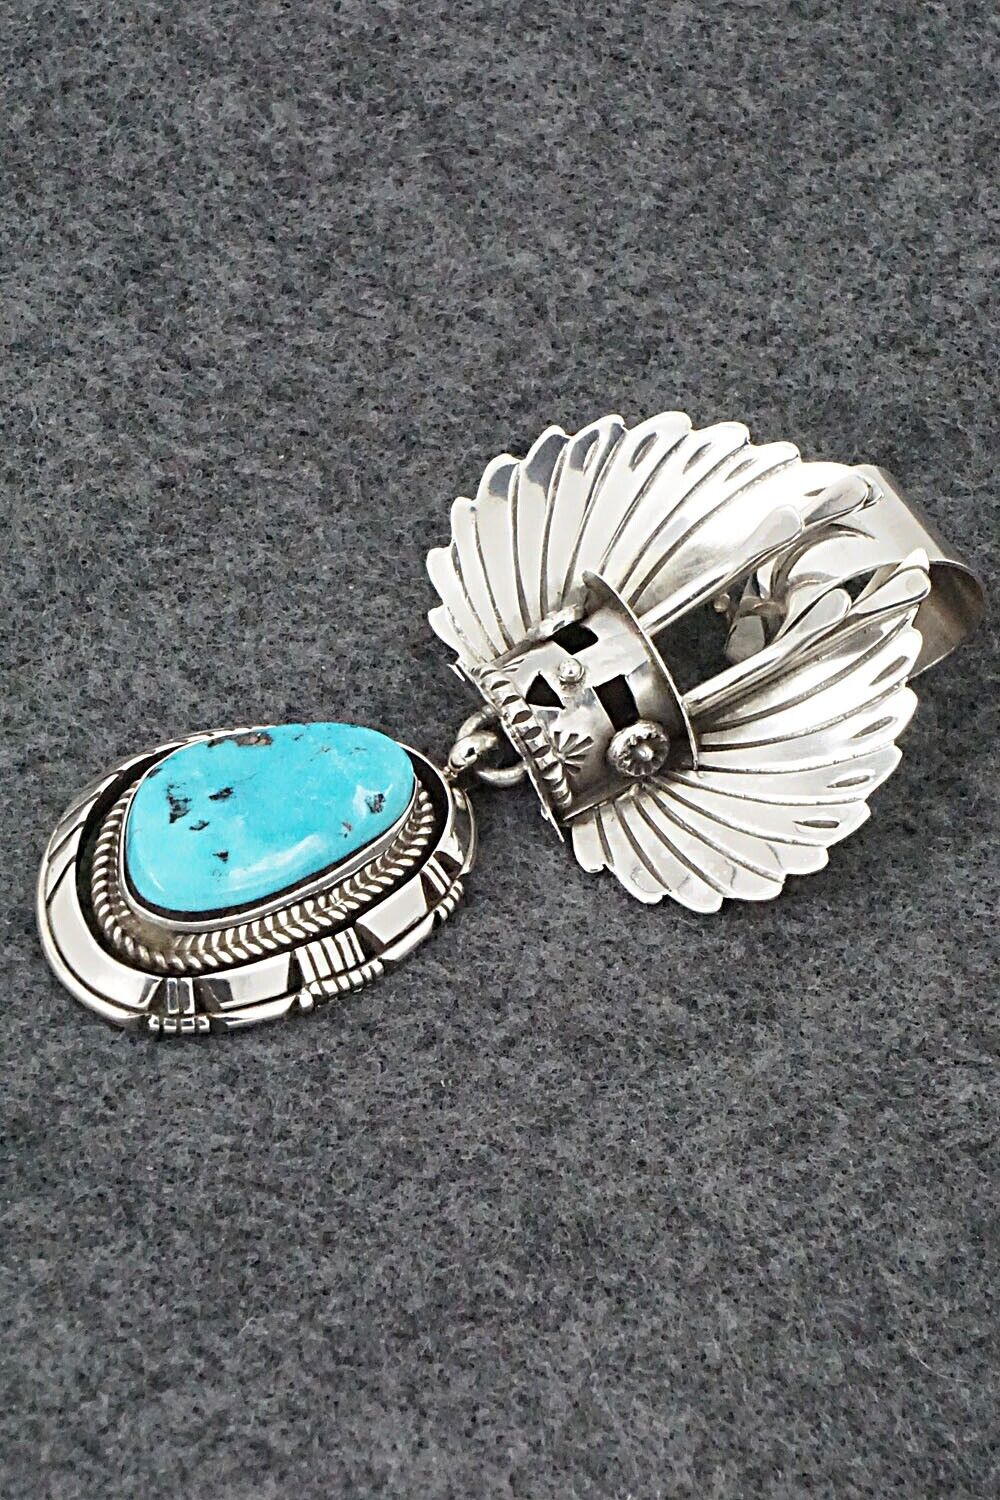 Turquoise & Sterling Silver Pendant - Rita Lee